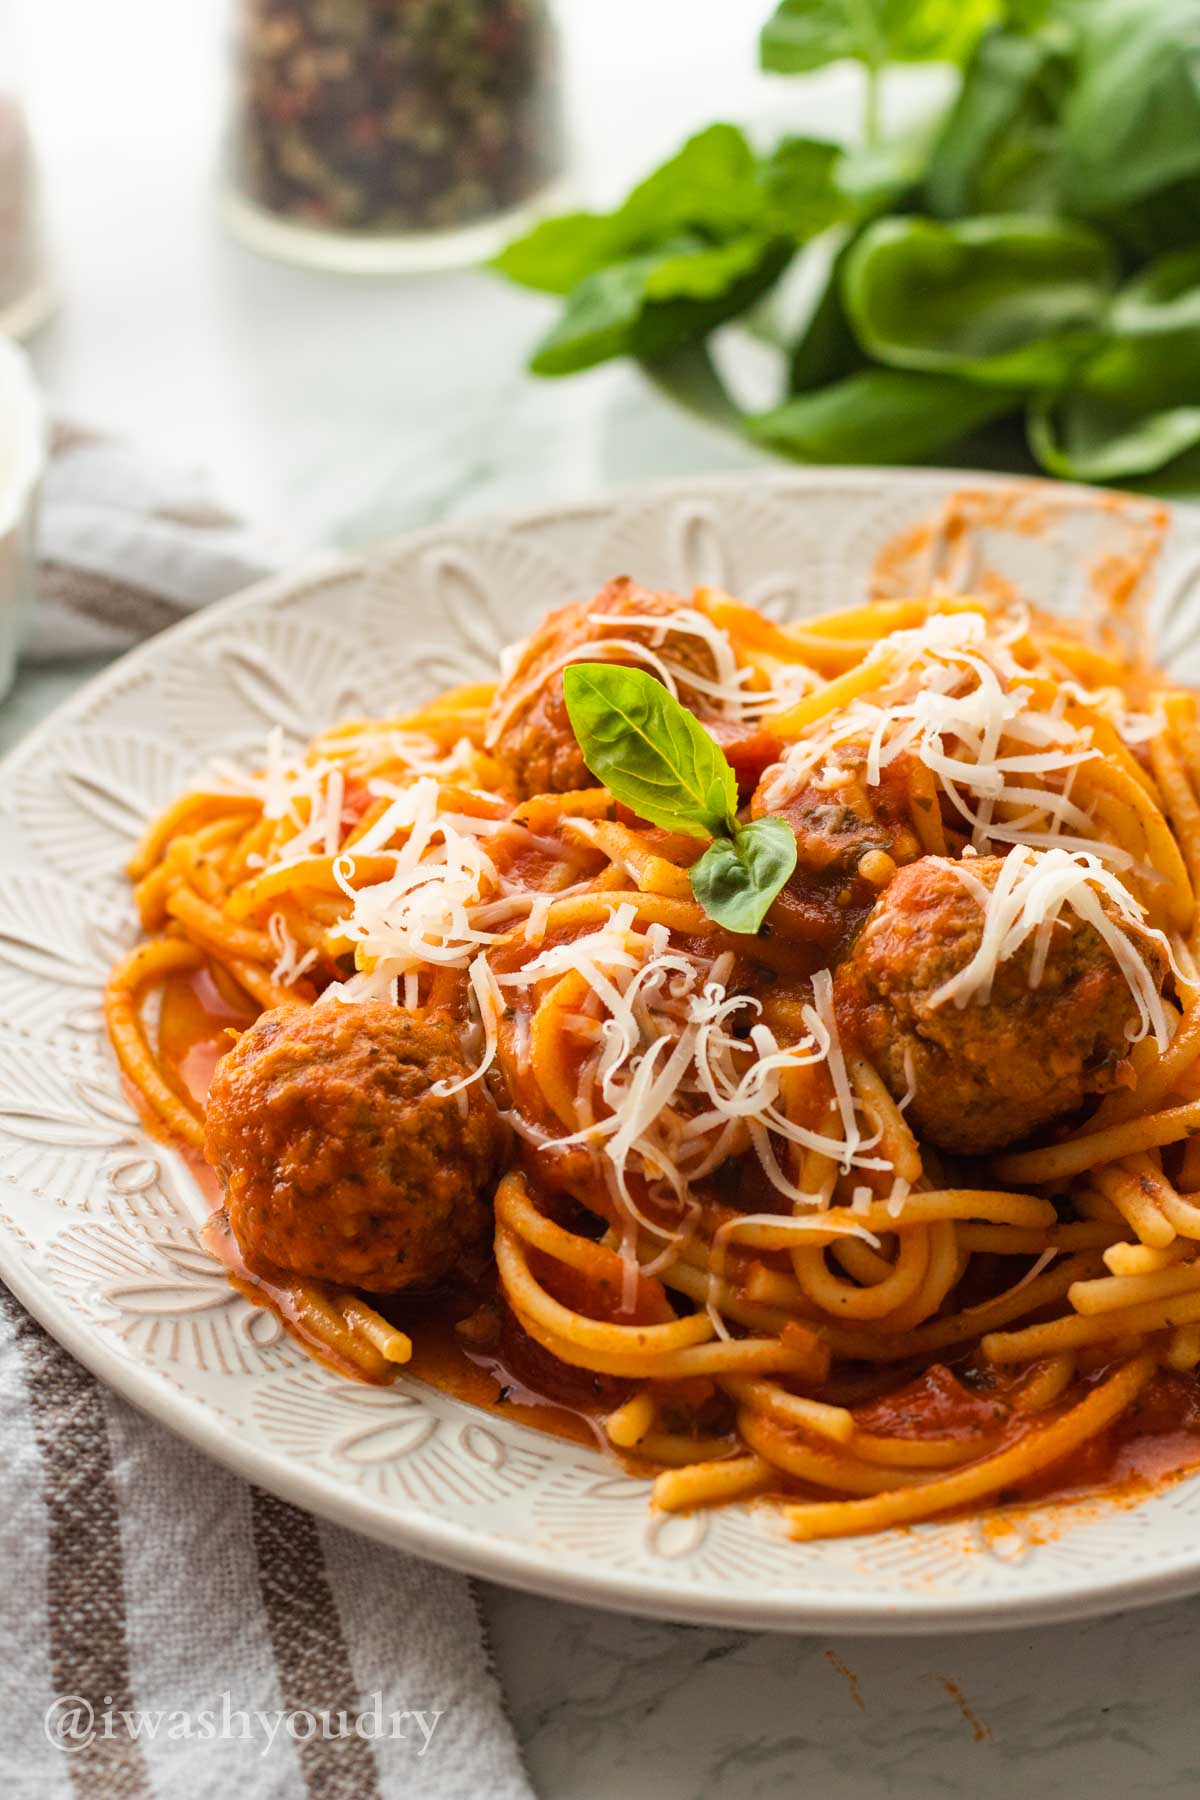 Instant Pot Spaghetti Recipe (Ready In Less Than 30 Minutes)